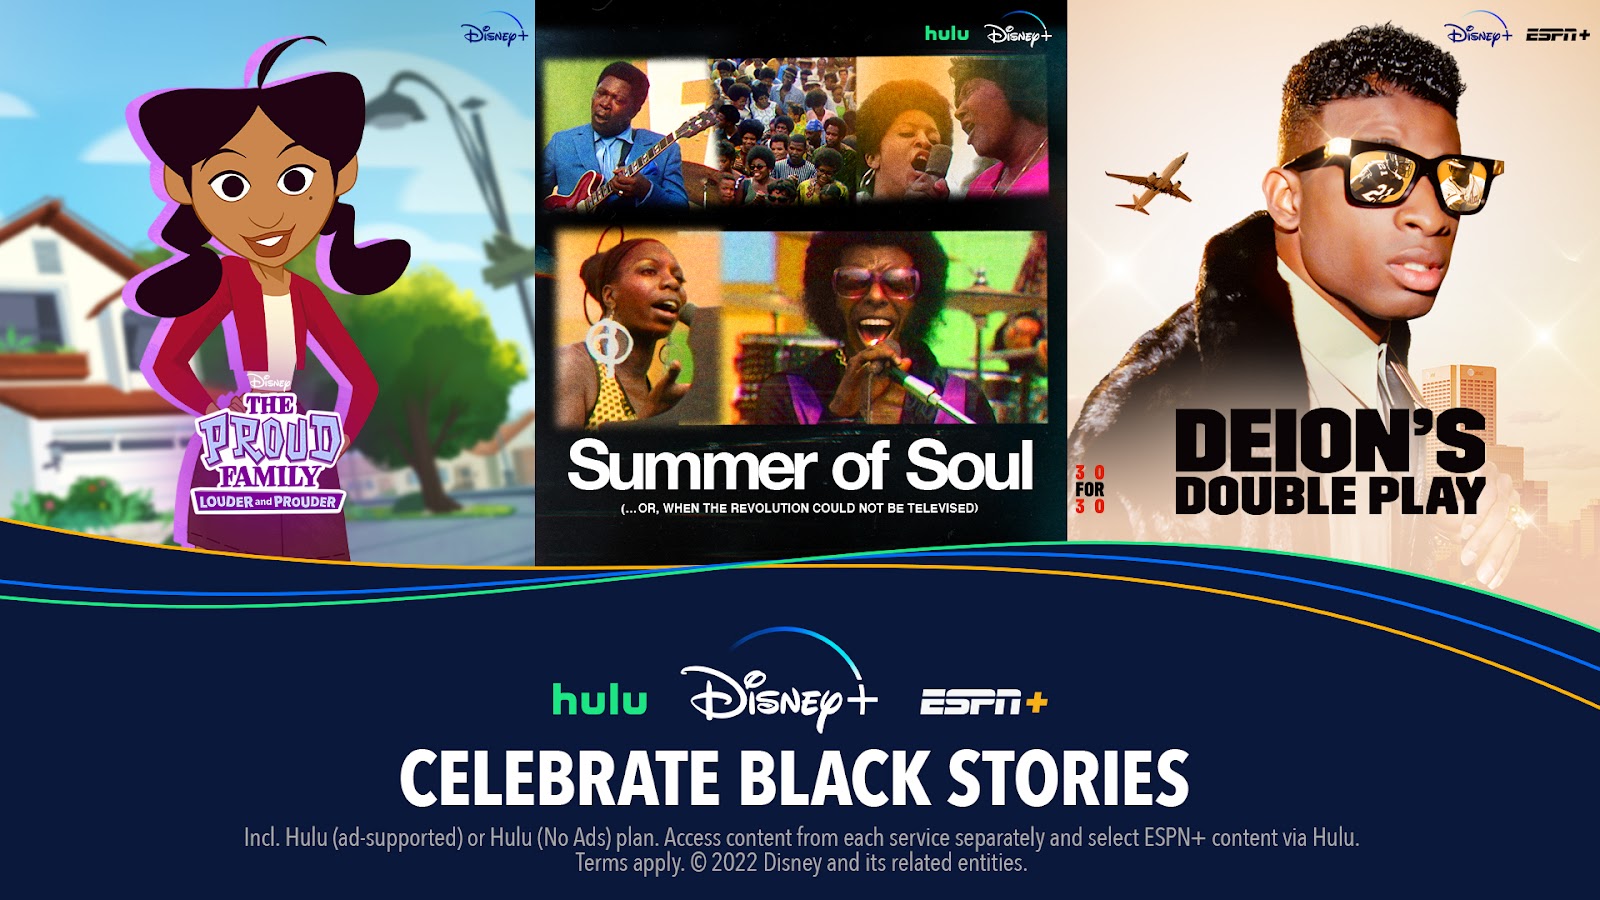 Disney+, Hulu, and ESPN+ to Honor Black History Month With New Content